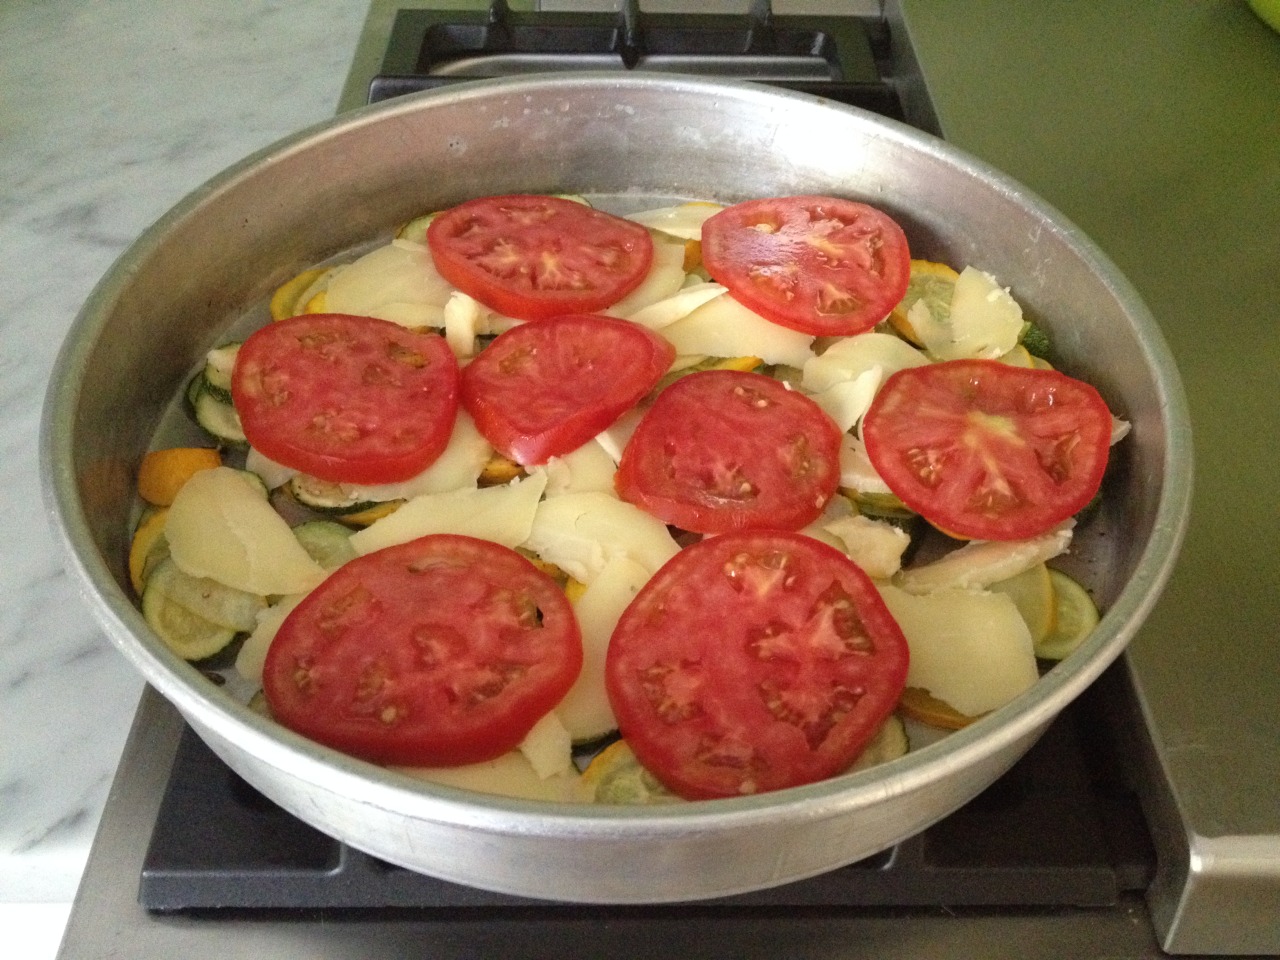 domenicacooks:  Summer gratin: Slice zucchini and summer squash; toss with olive